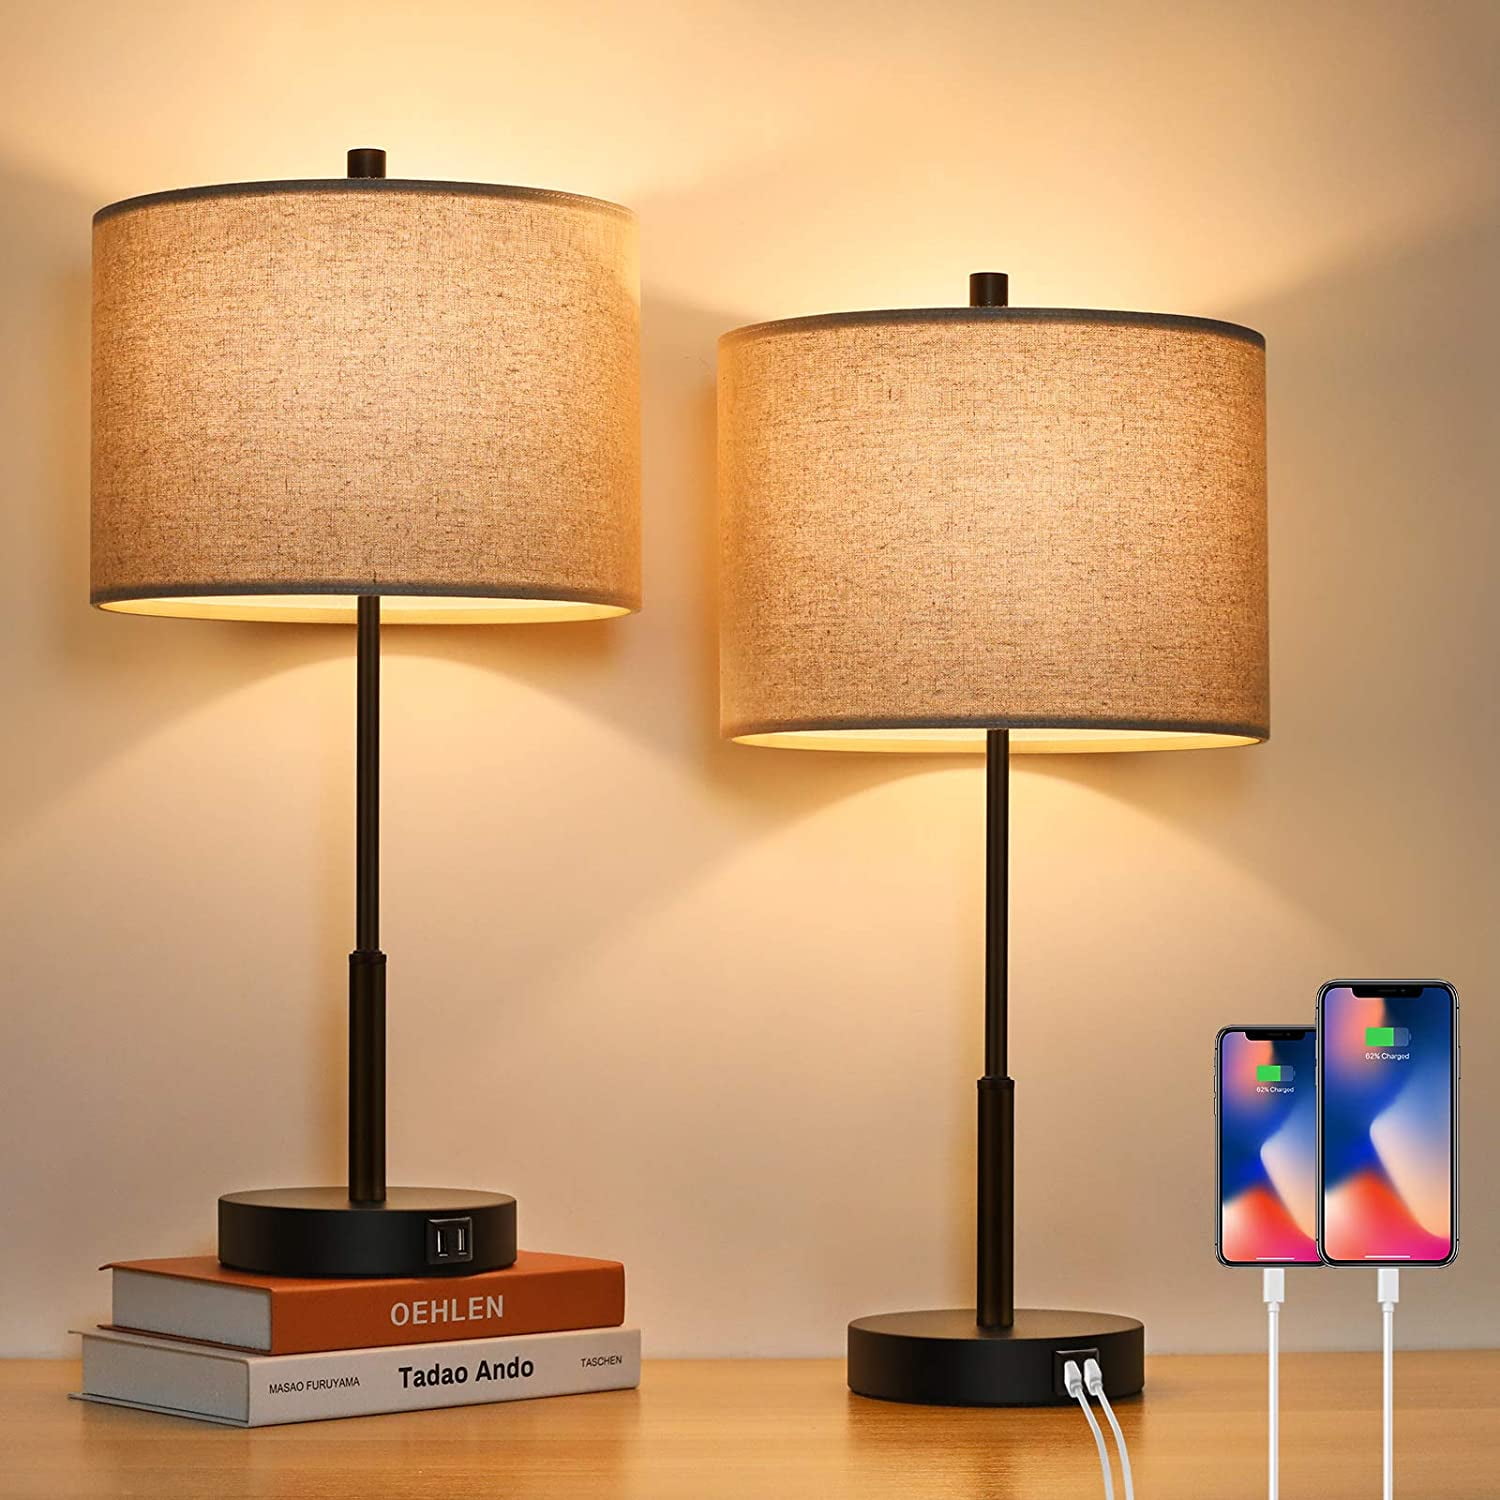 Bedside Lamp, 3 Way Dimmable Touch Control Table Lamp with 2 USB 